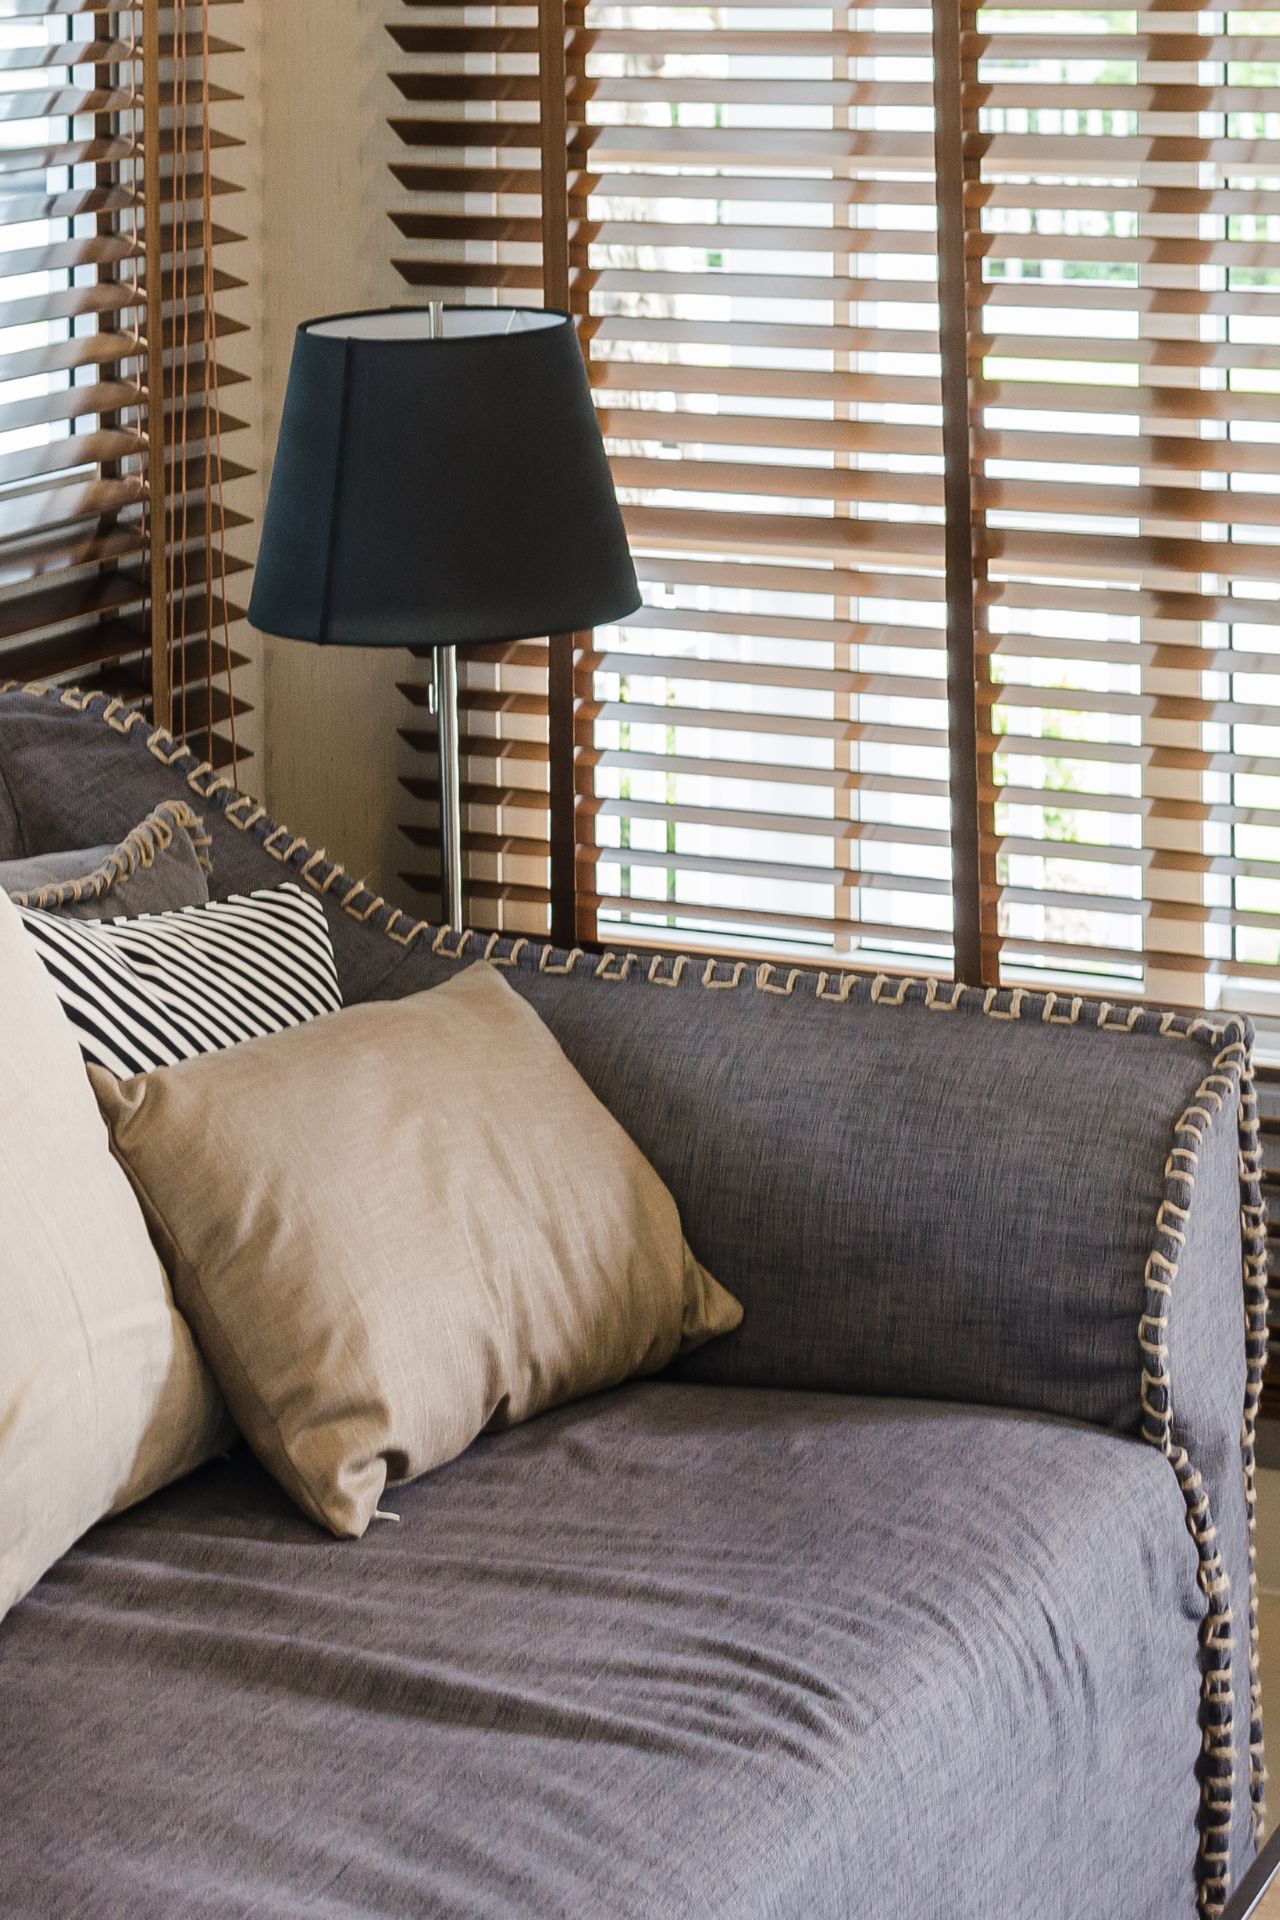 Made to measure bamboo blinds in dubai